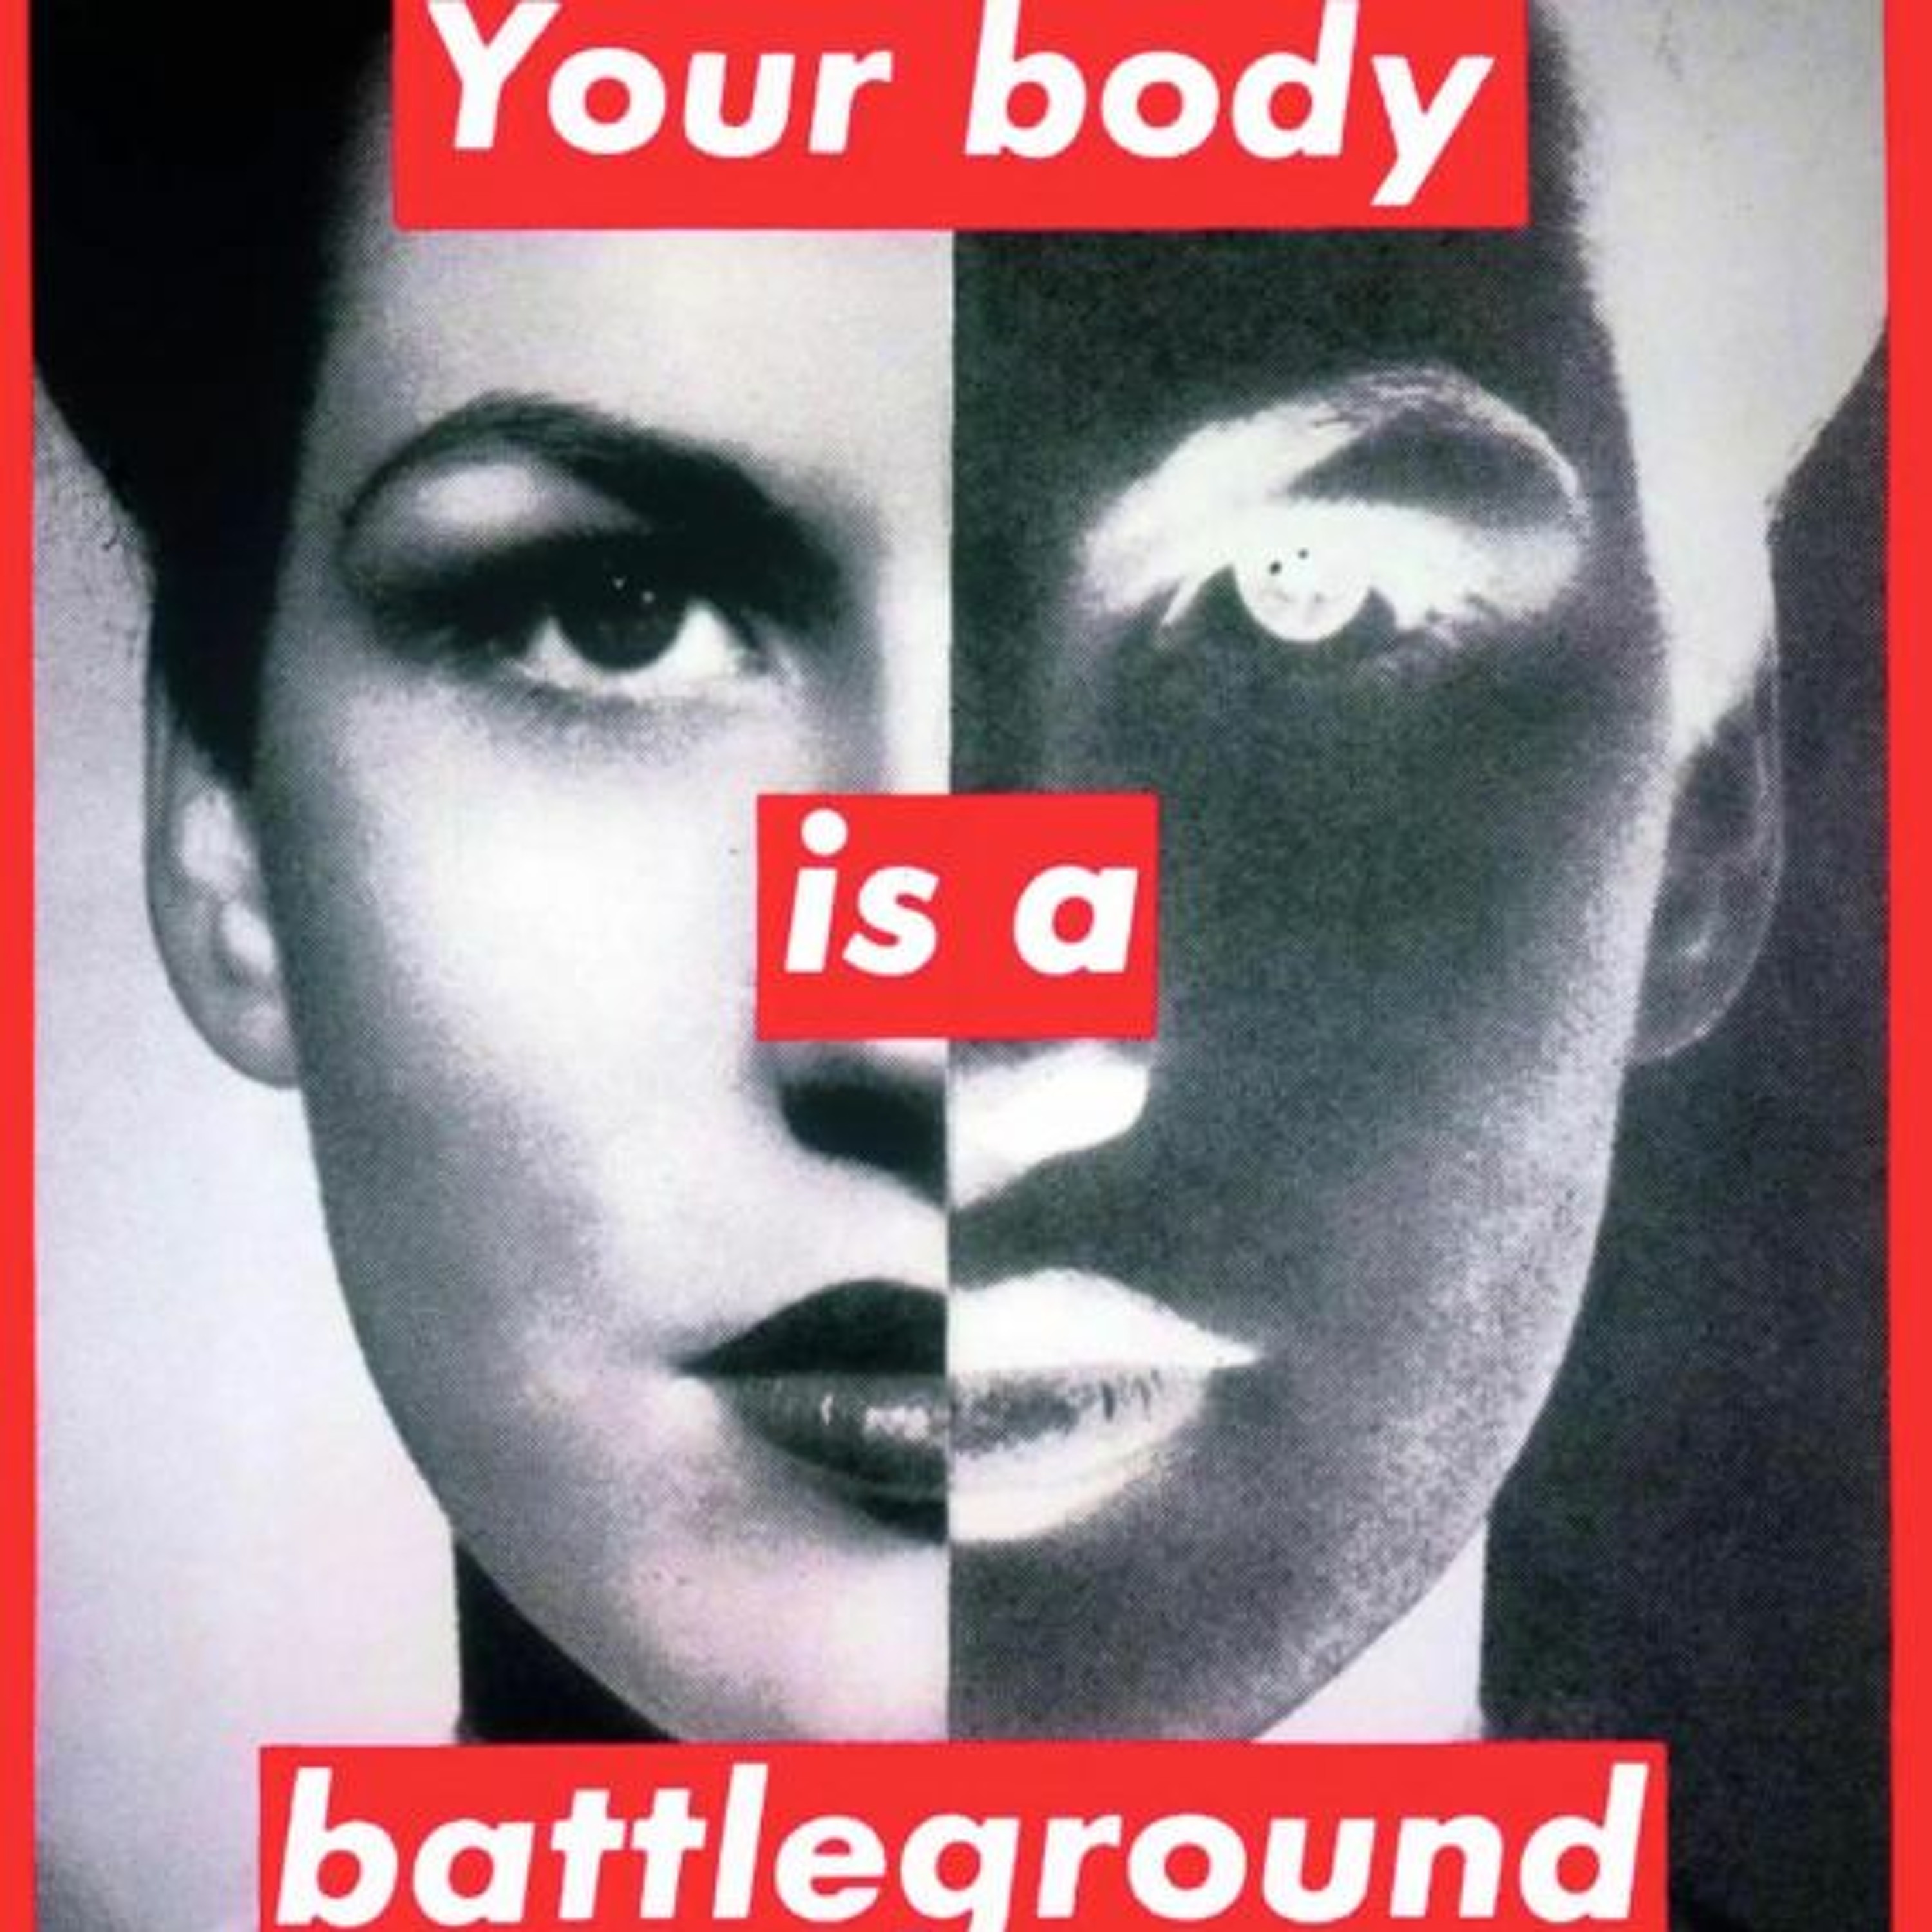 Ep. 64 - Barbara Kruger's "Untitled (Your Body is a Battleground)" (1989)